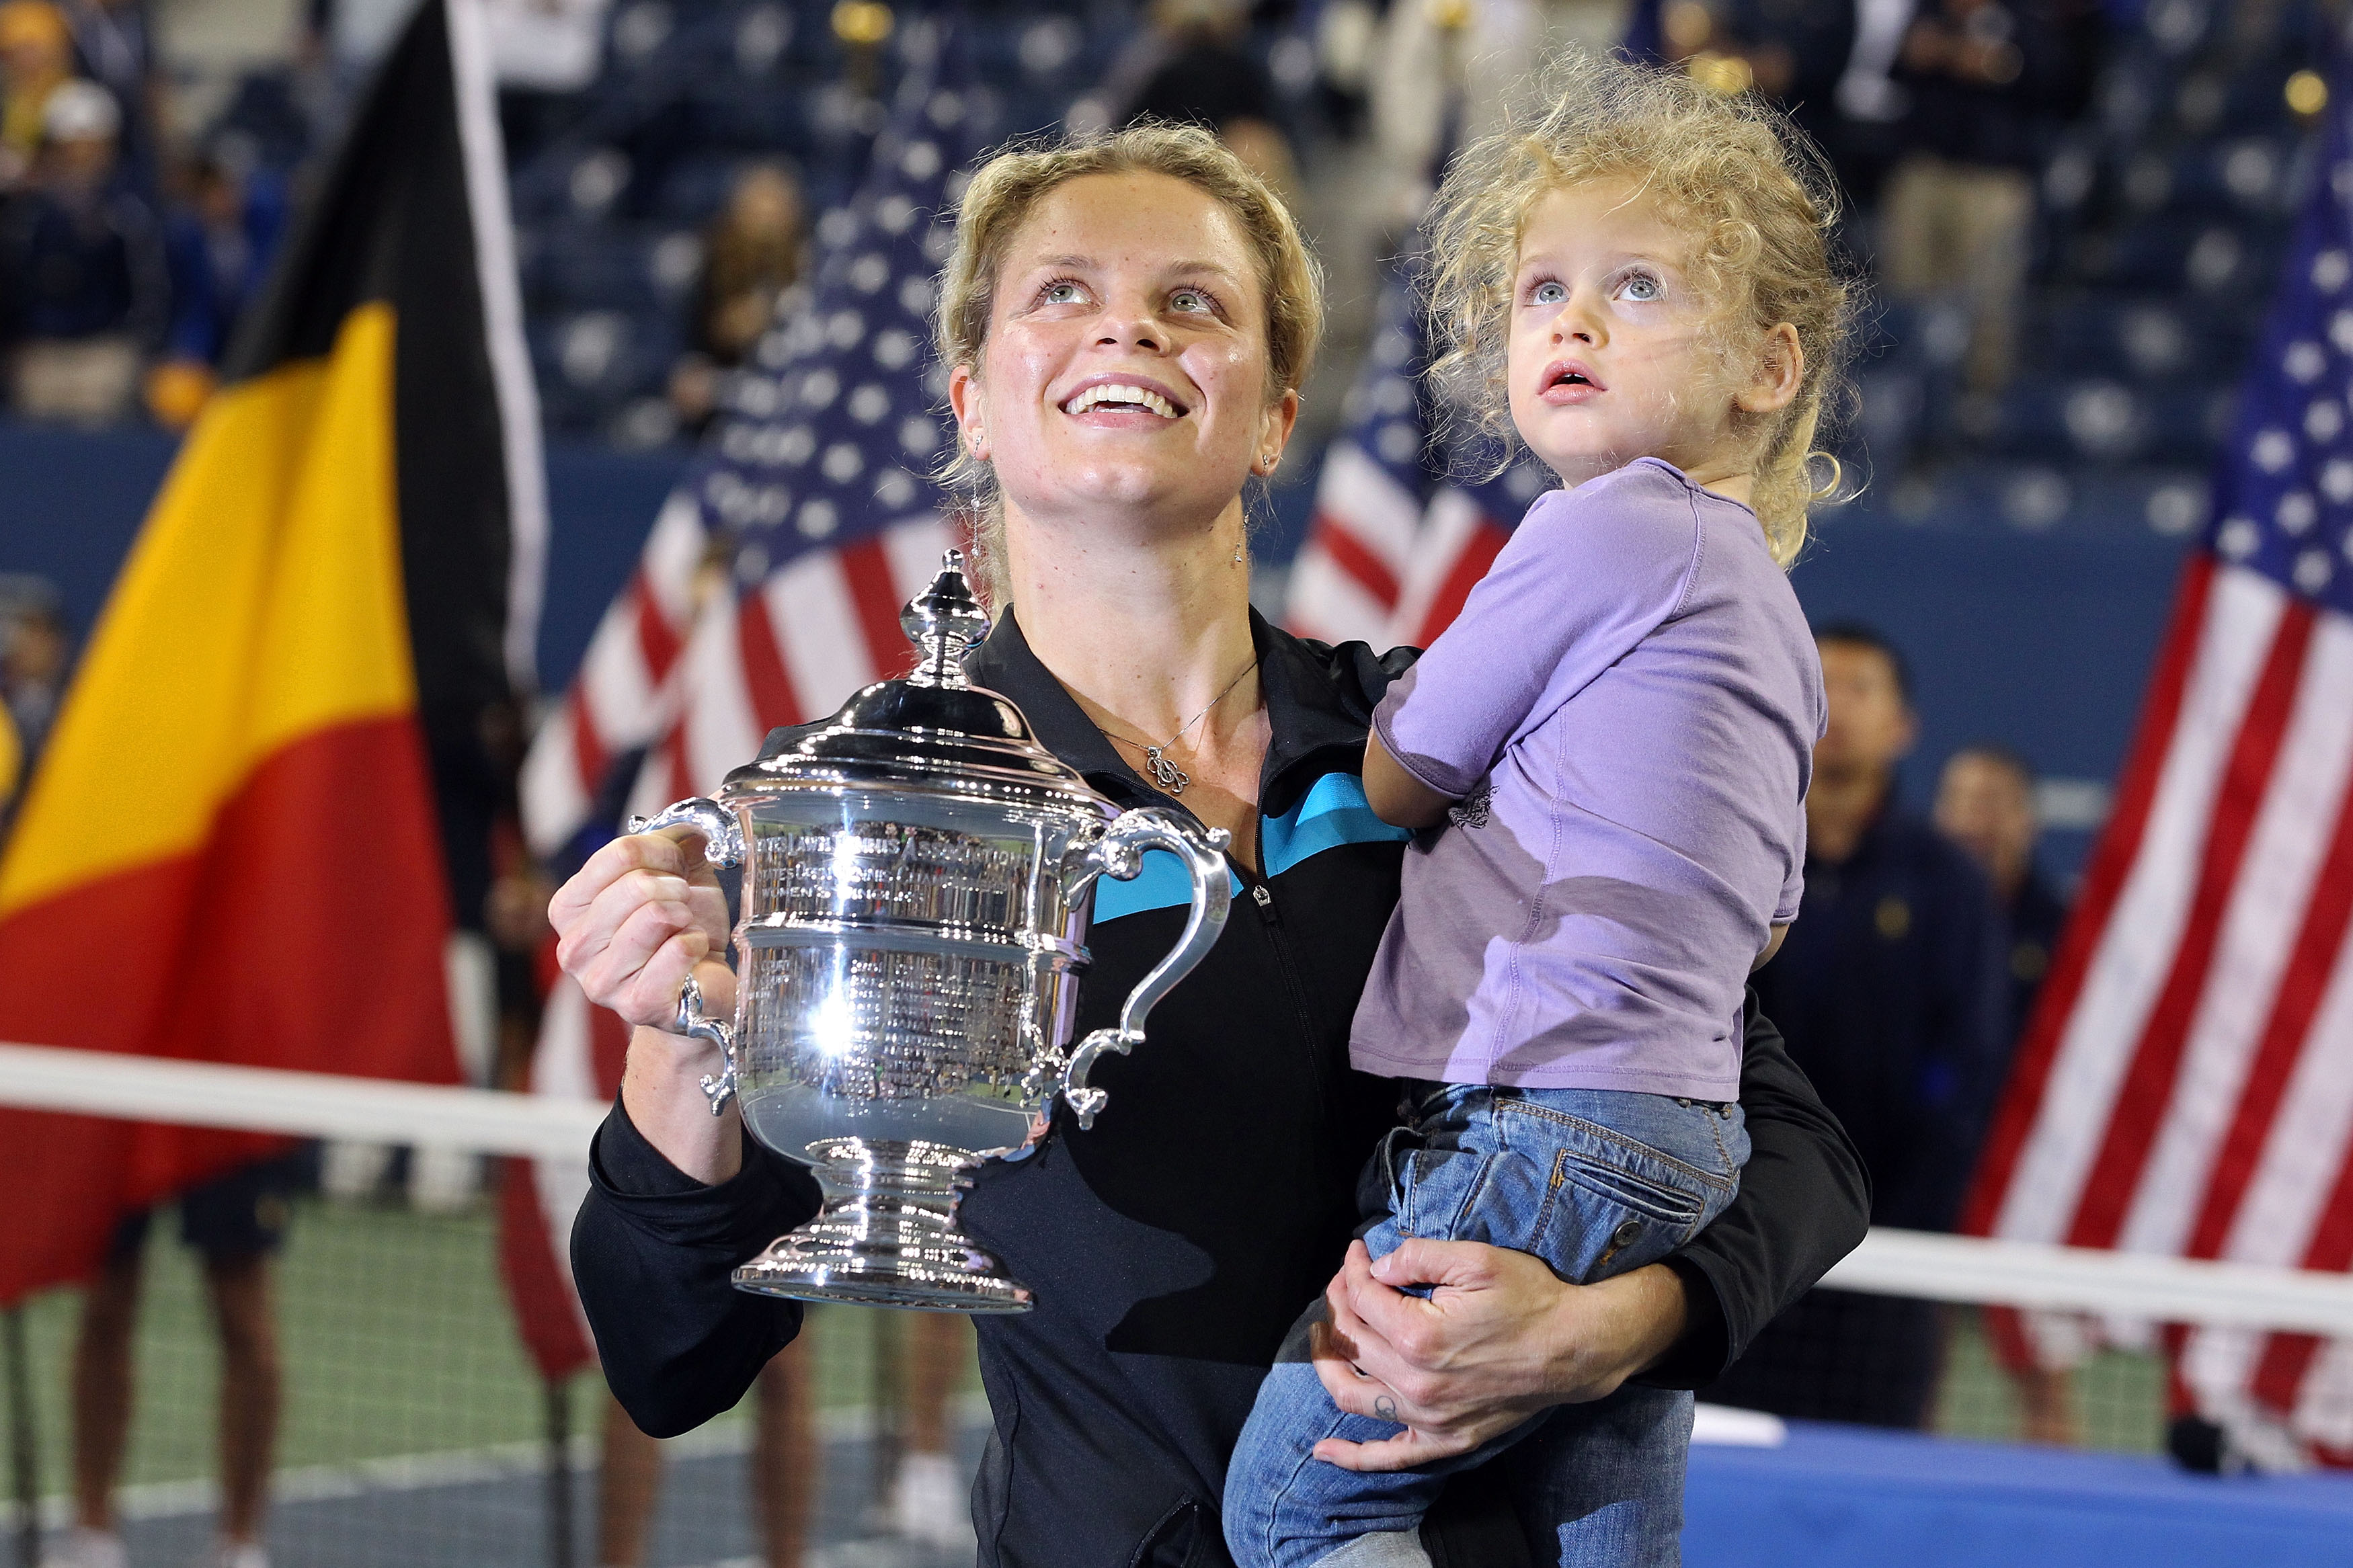 NEW YORK - SEPTEMBER 11:  Kim Clijsters of Belgium and daughter Jada pose with the championship trophy after Clijsters defeated Vera Zvonareva of Russia during their women's singles final on day thirteen of the 2010 U.S. Open at the USTA Billie Jean King